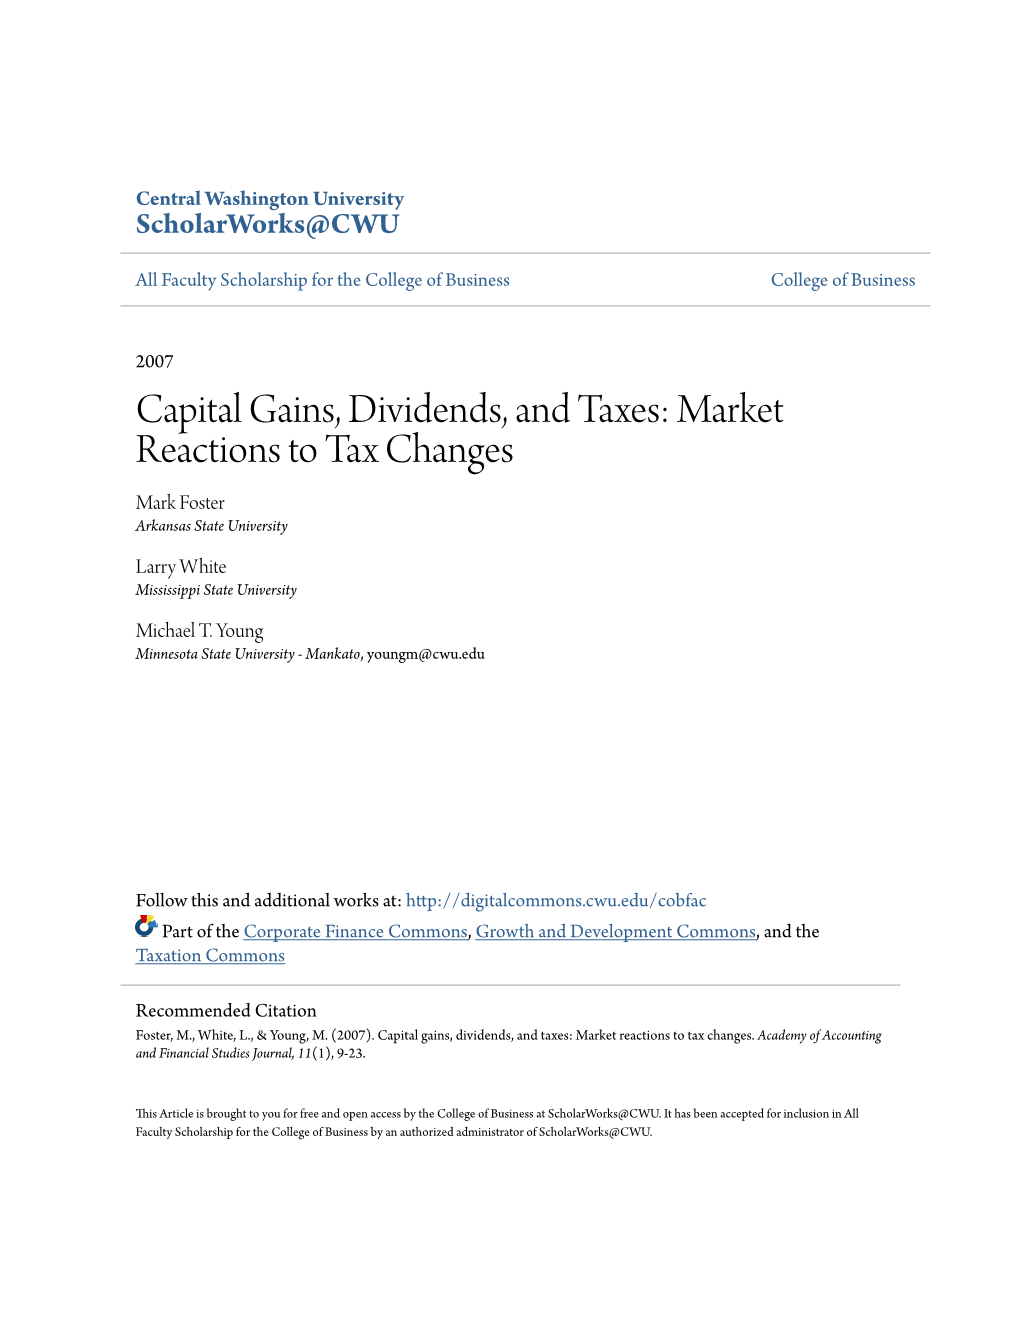 Capital Gains, Dividends, and Taxes: Market Reactions to Tax Changes Mark Foster Arkansas State University